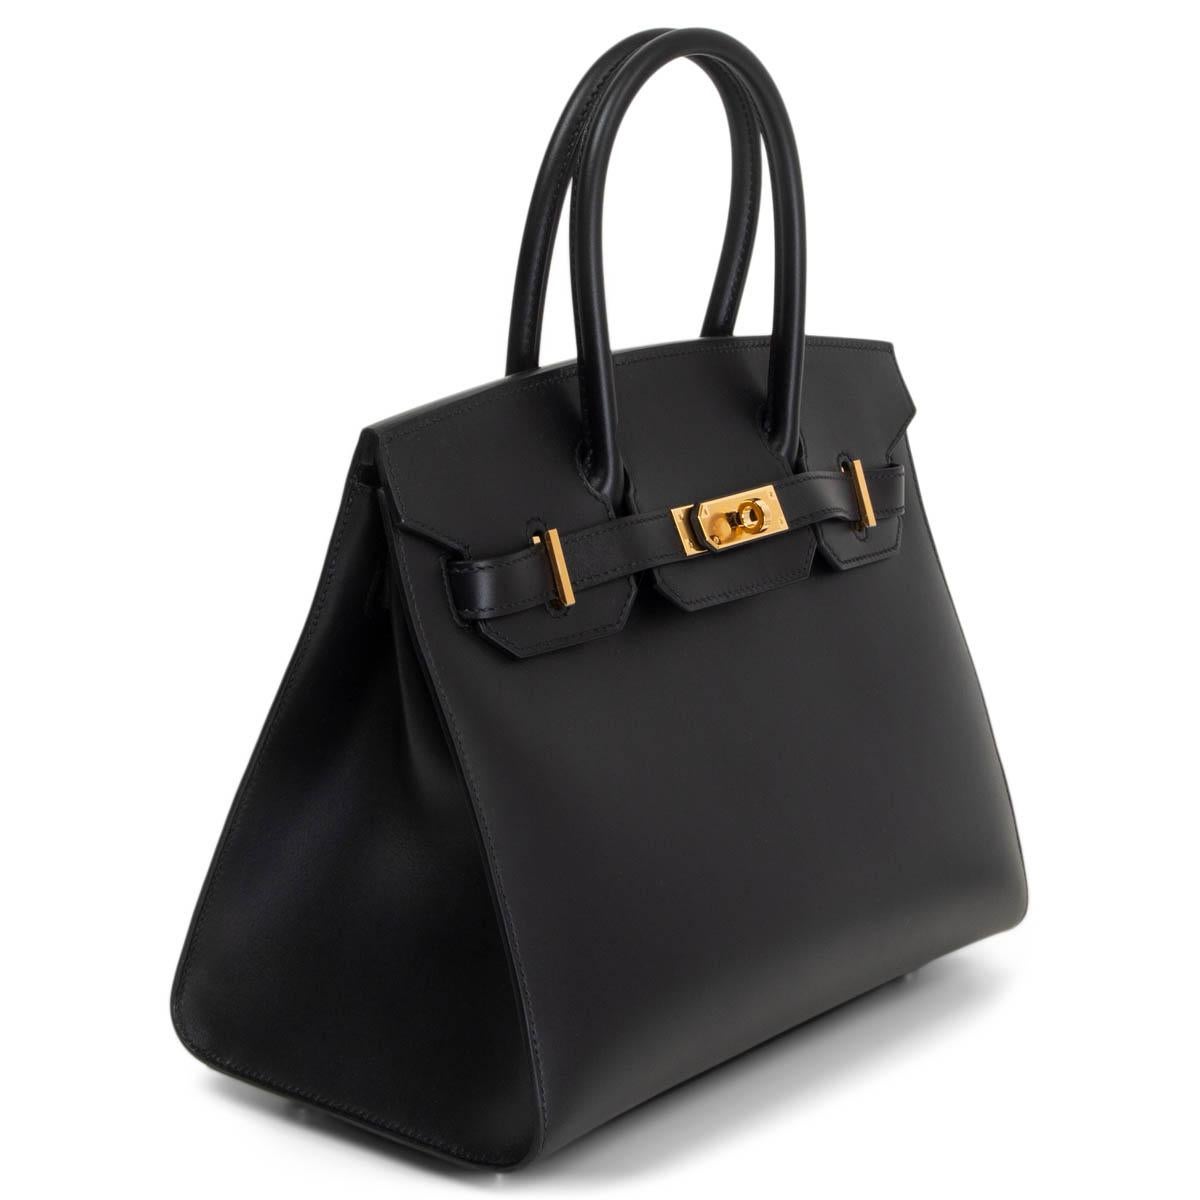 100% authentic Hermes 'Birkin 30 Sellier' bag in Noir (black) Veau Monsieur leather with gold-plated hardware. Lined in Chevre (goat skin) with an open pocket against the front and a zipper pocket against the back. Brand new. Comes with keys, lock,